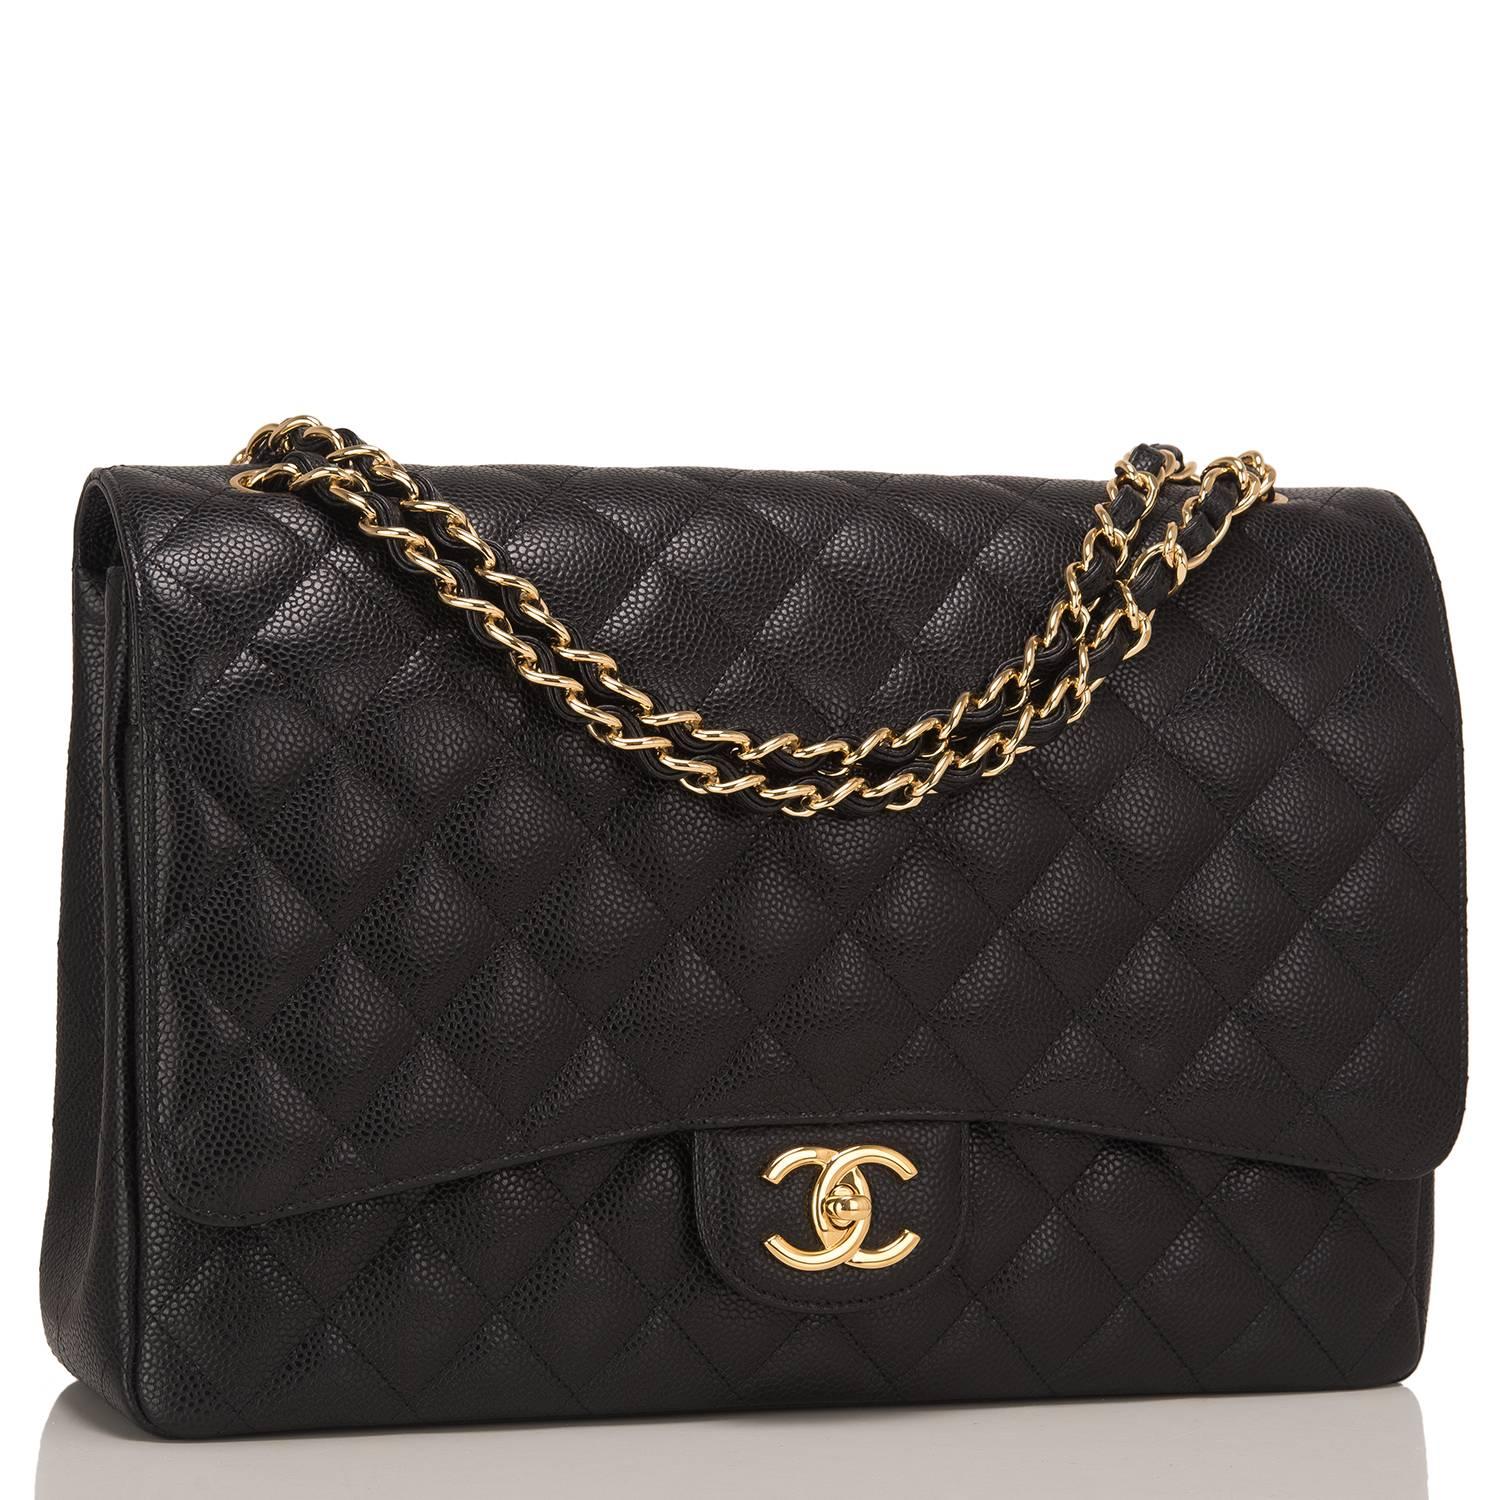 Chanel Maxi Classic Double Flap bag of black quilted caviar leather with gold hardware.

This bag features a front flap with signature CC turnlock closure, half moon back pocket, and adjustable interwoven gold tone chain link and black leather